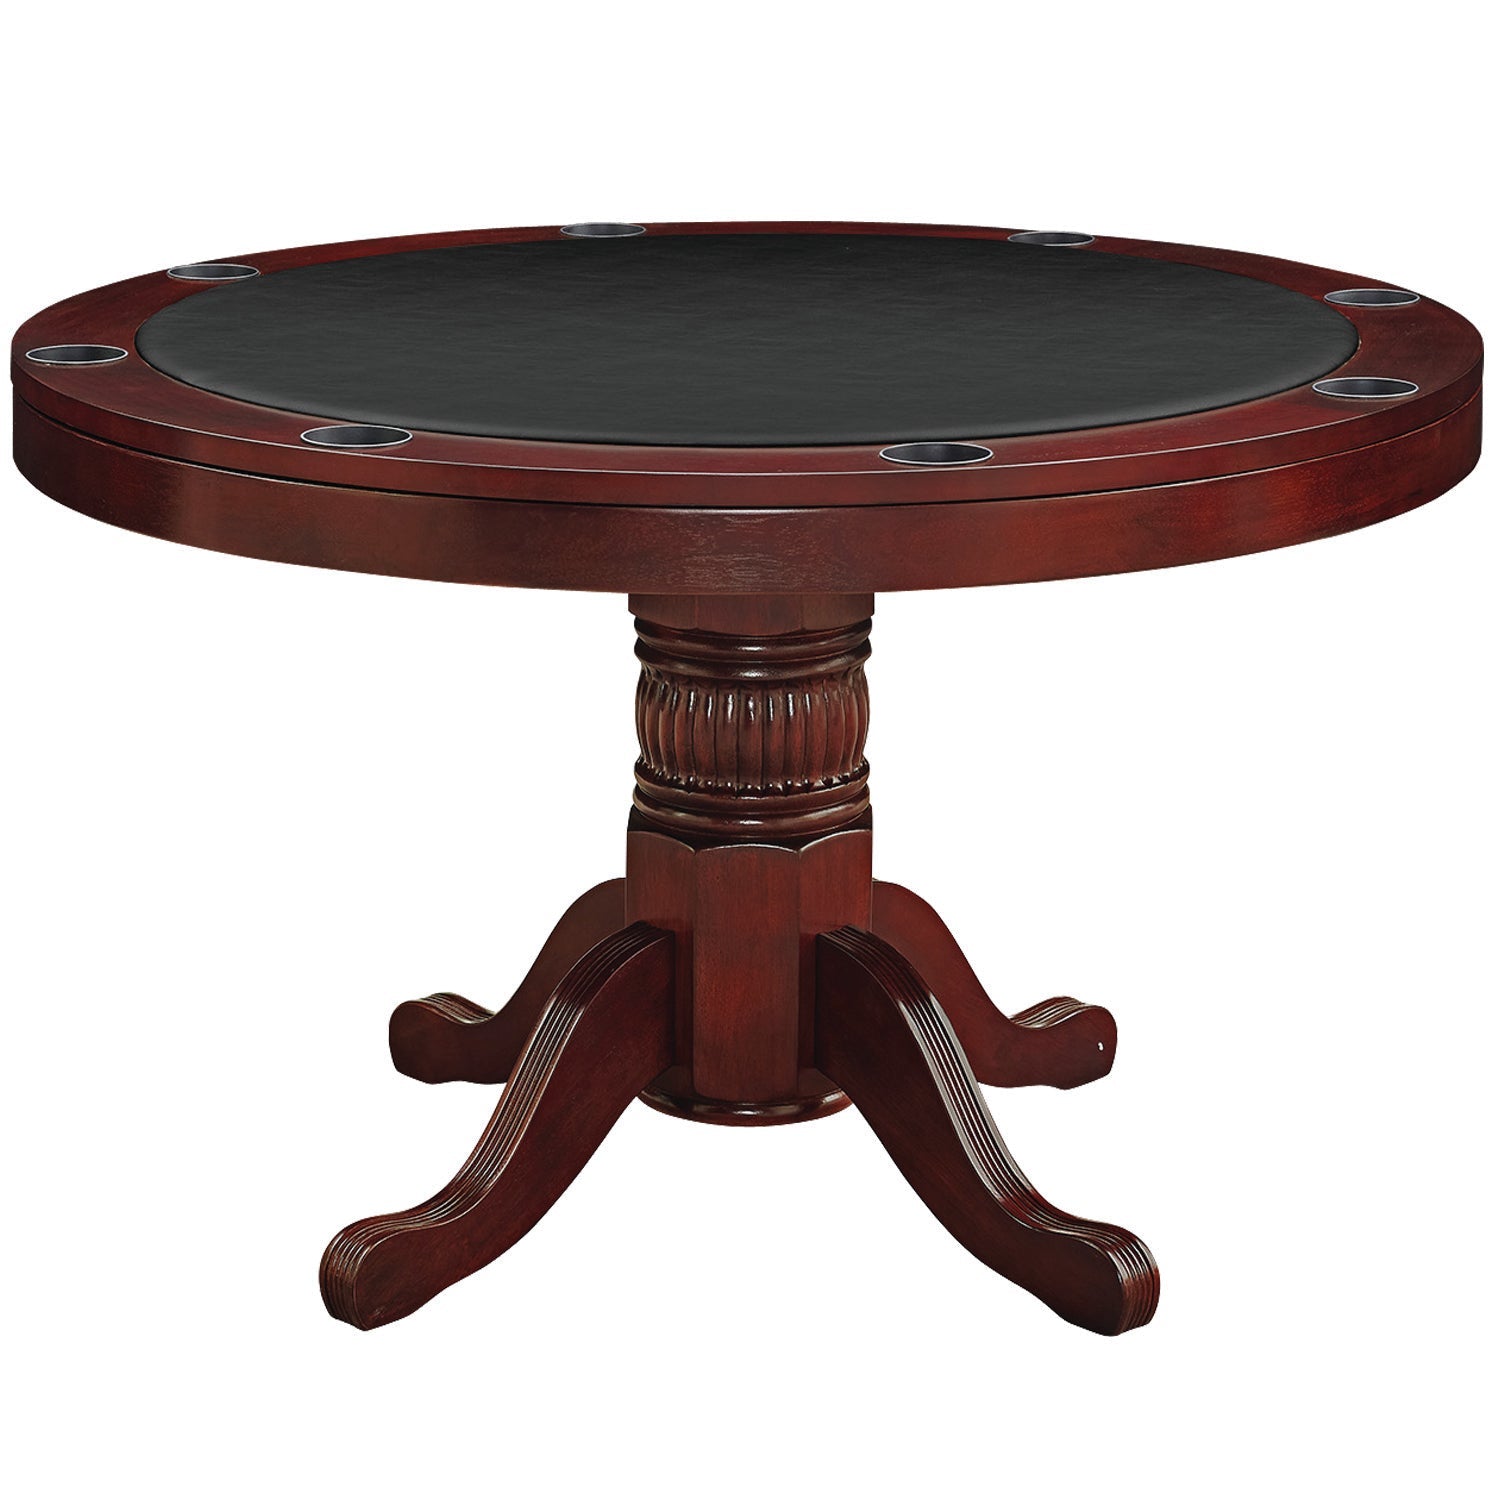 RAM Game Room Game Table 48" - The Bar Design